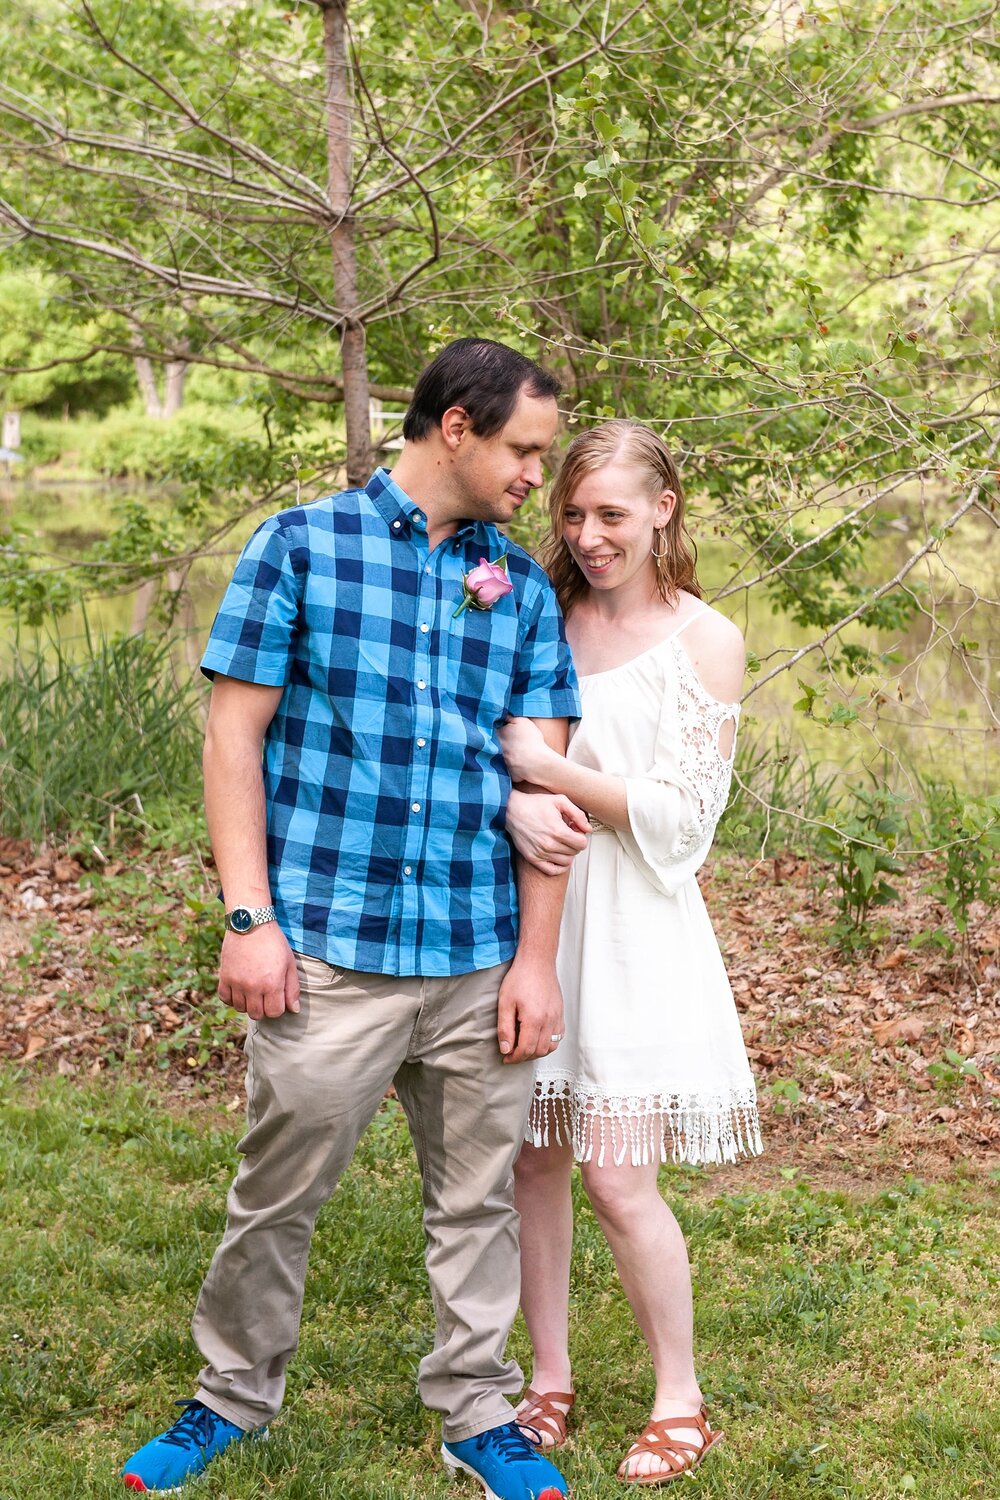 Susquehanna State Park intimate wedding in Harford, Maryland | Frederick MD wedding photographer Wendy Zook Photography captures COVID-19 elopement in Maryland